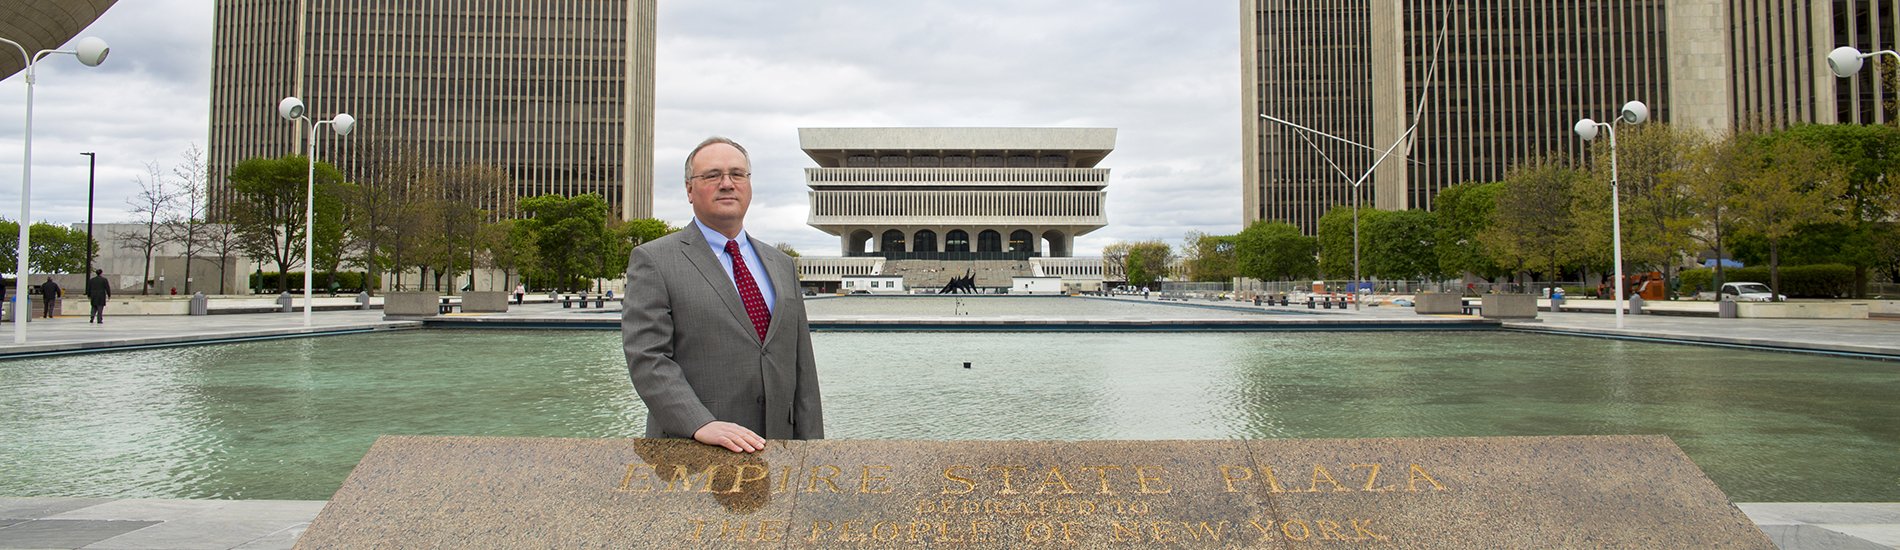 May 5, 2016 - David Hochfelder portrait at the Empire State Plaza for the 2016 Research Report. Photos by Paul Miller